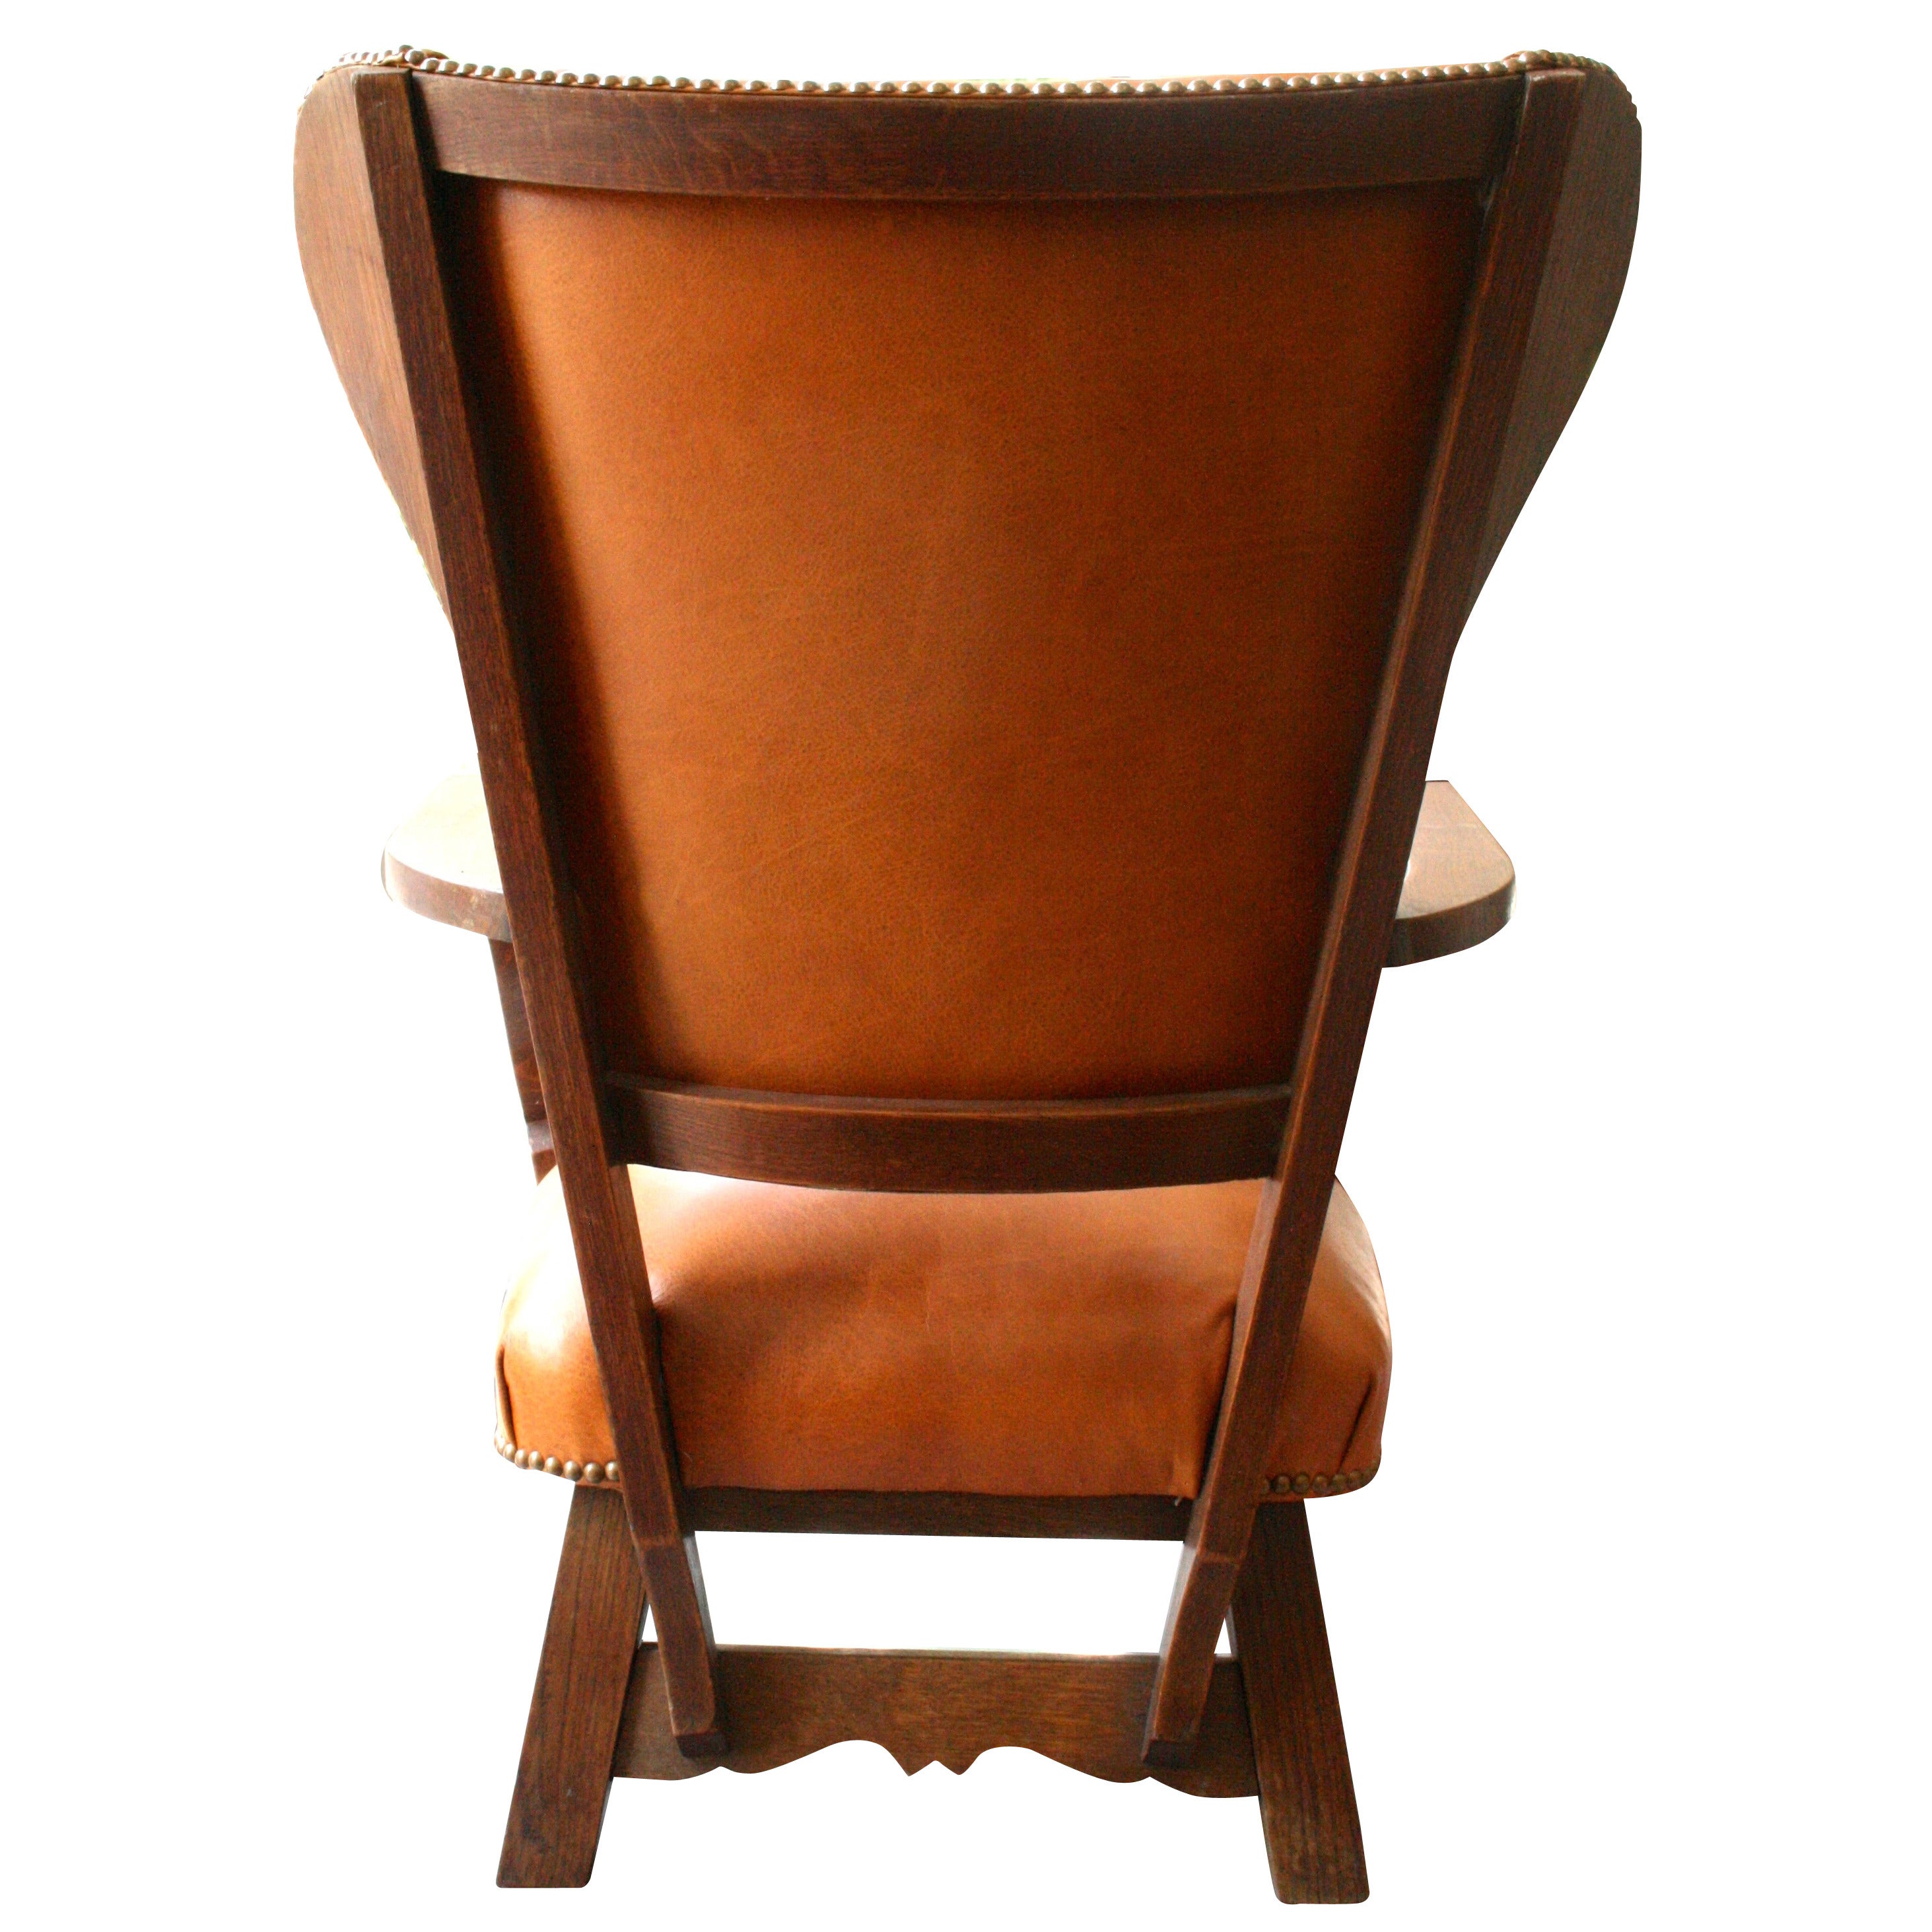 Oak and caramel leather wing chair